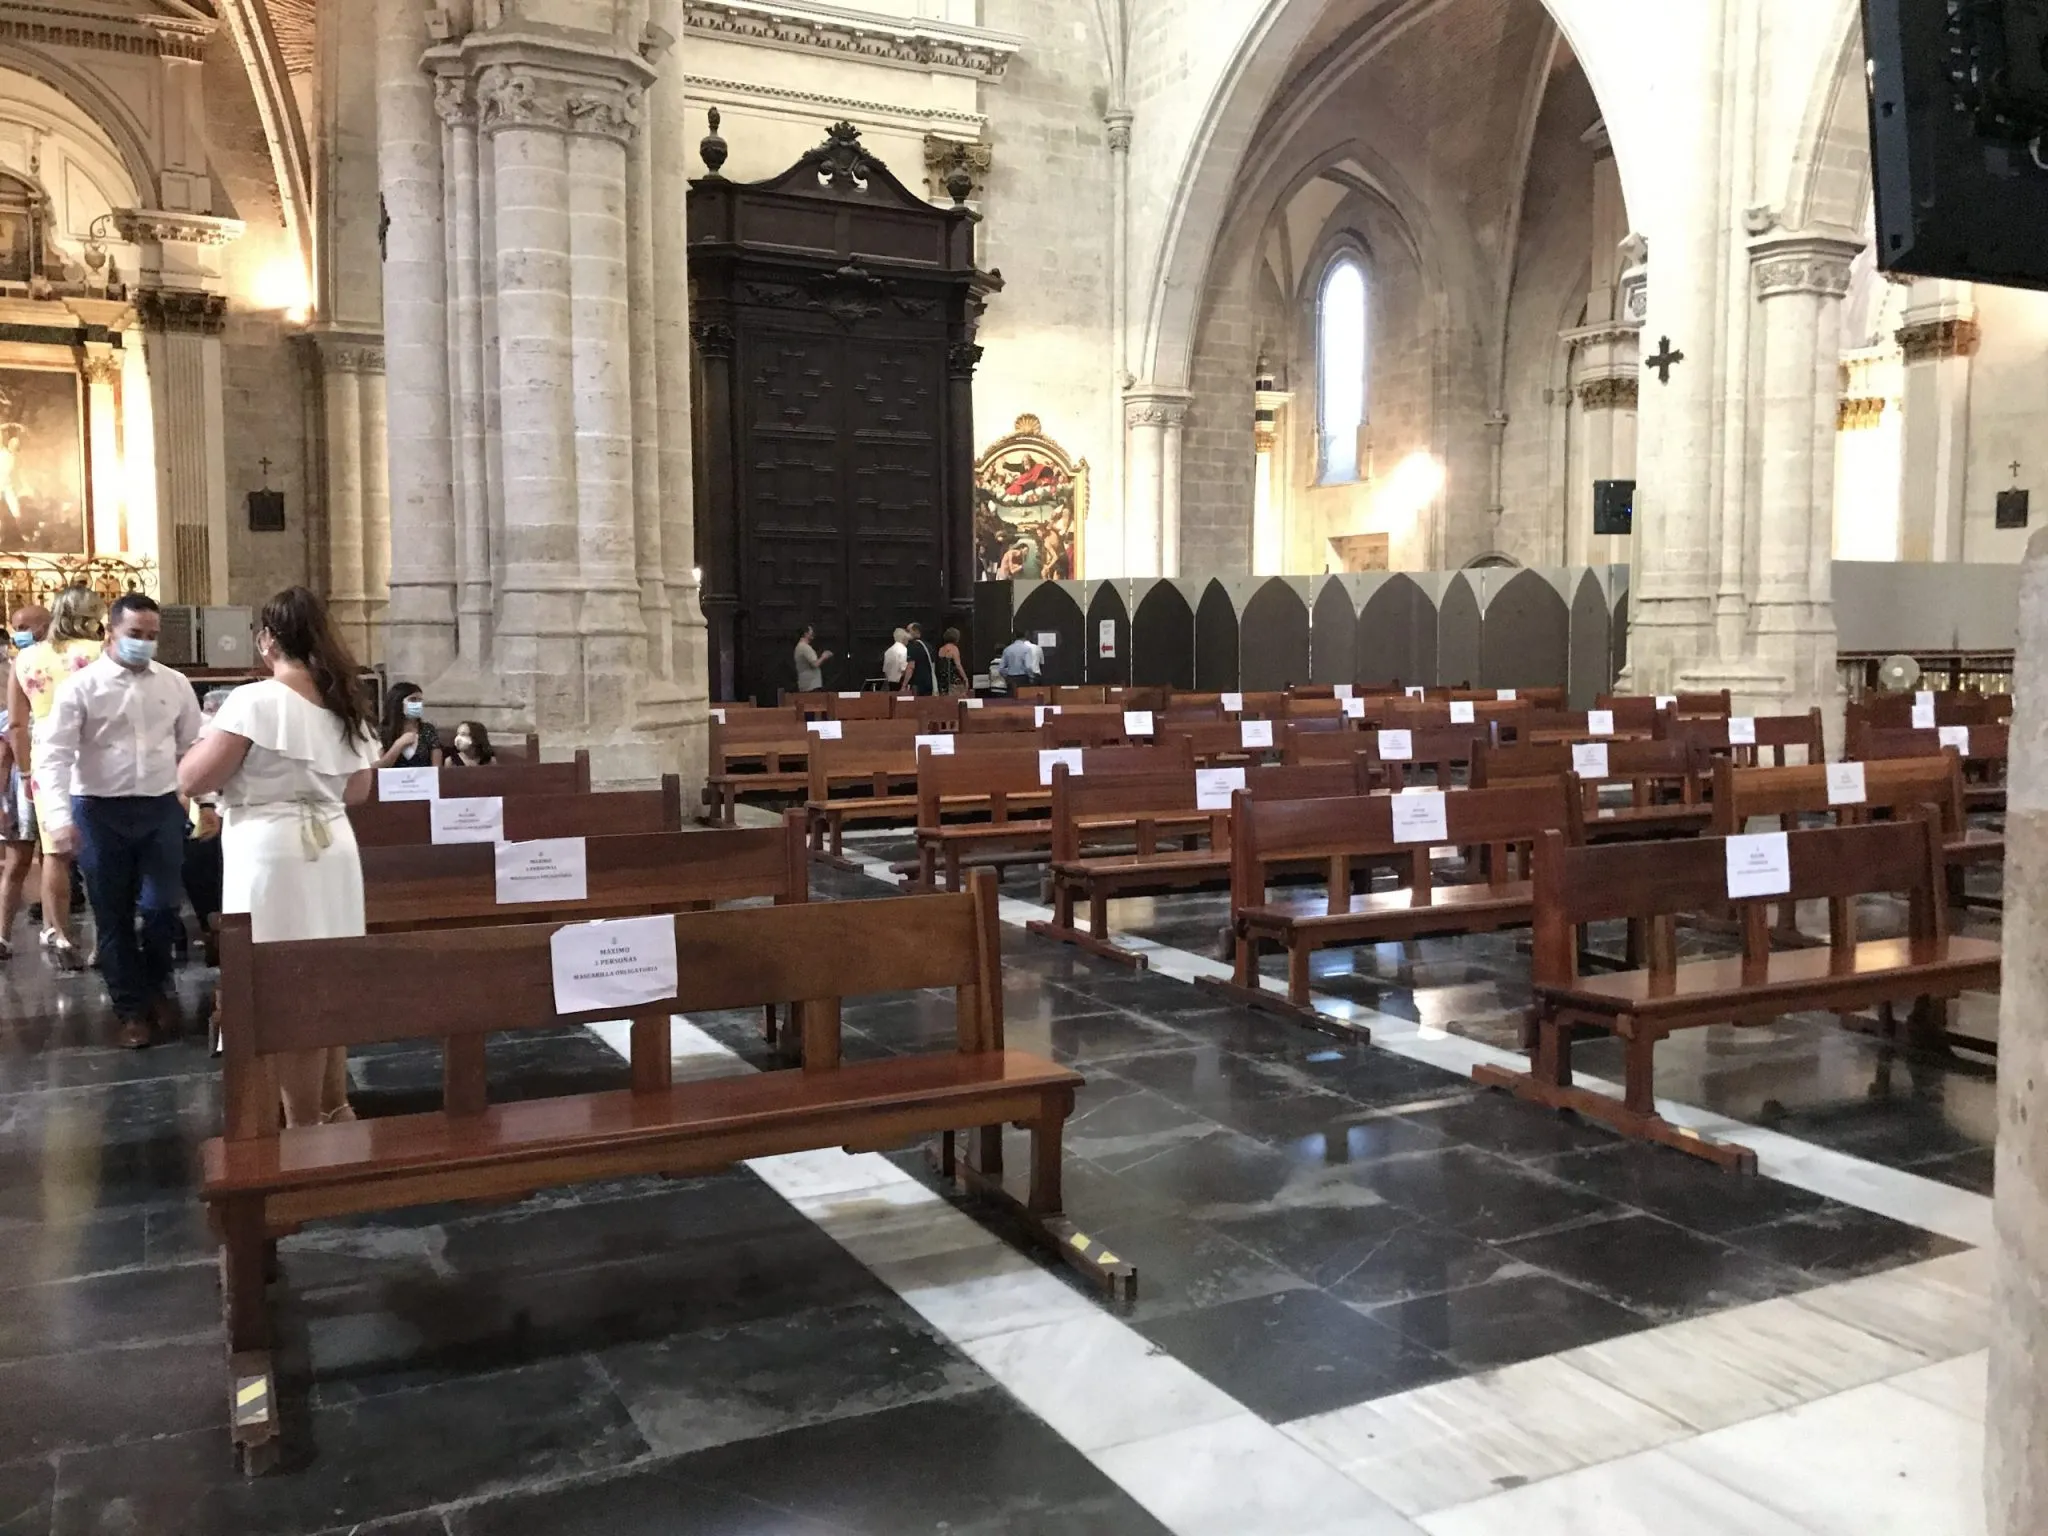 An image of church pews with social distancing signs as people start traveling again.